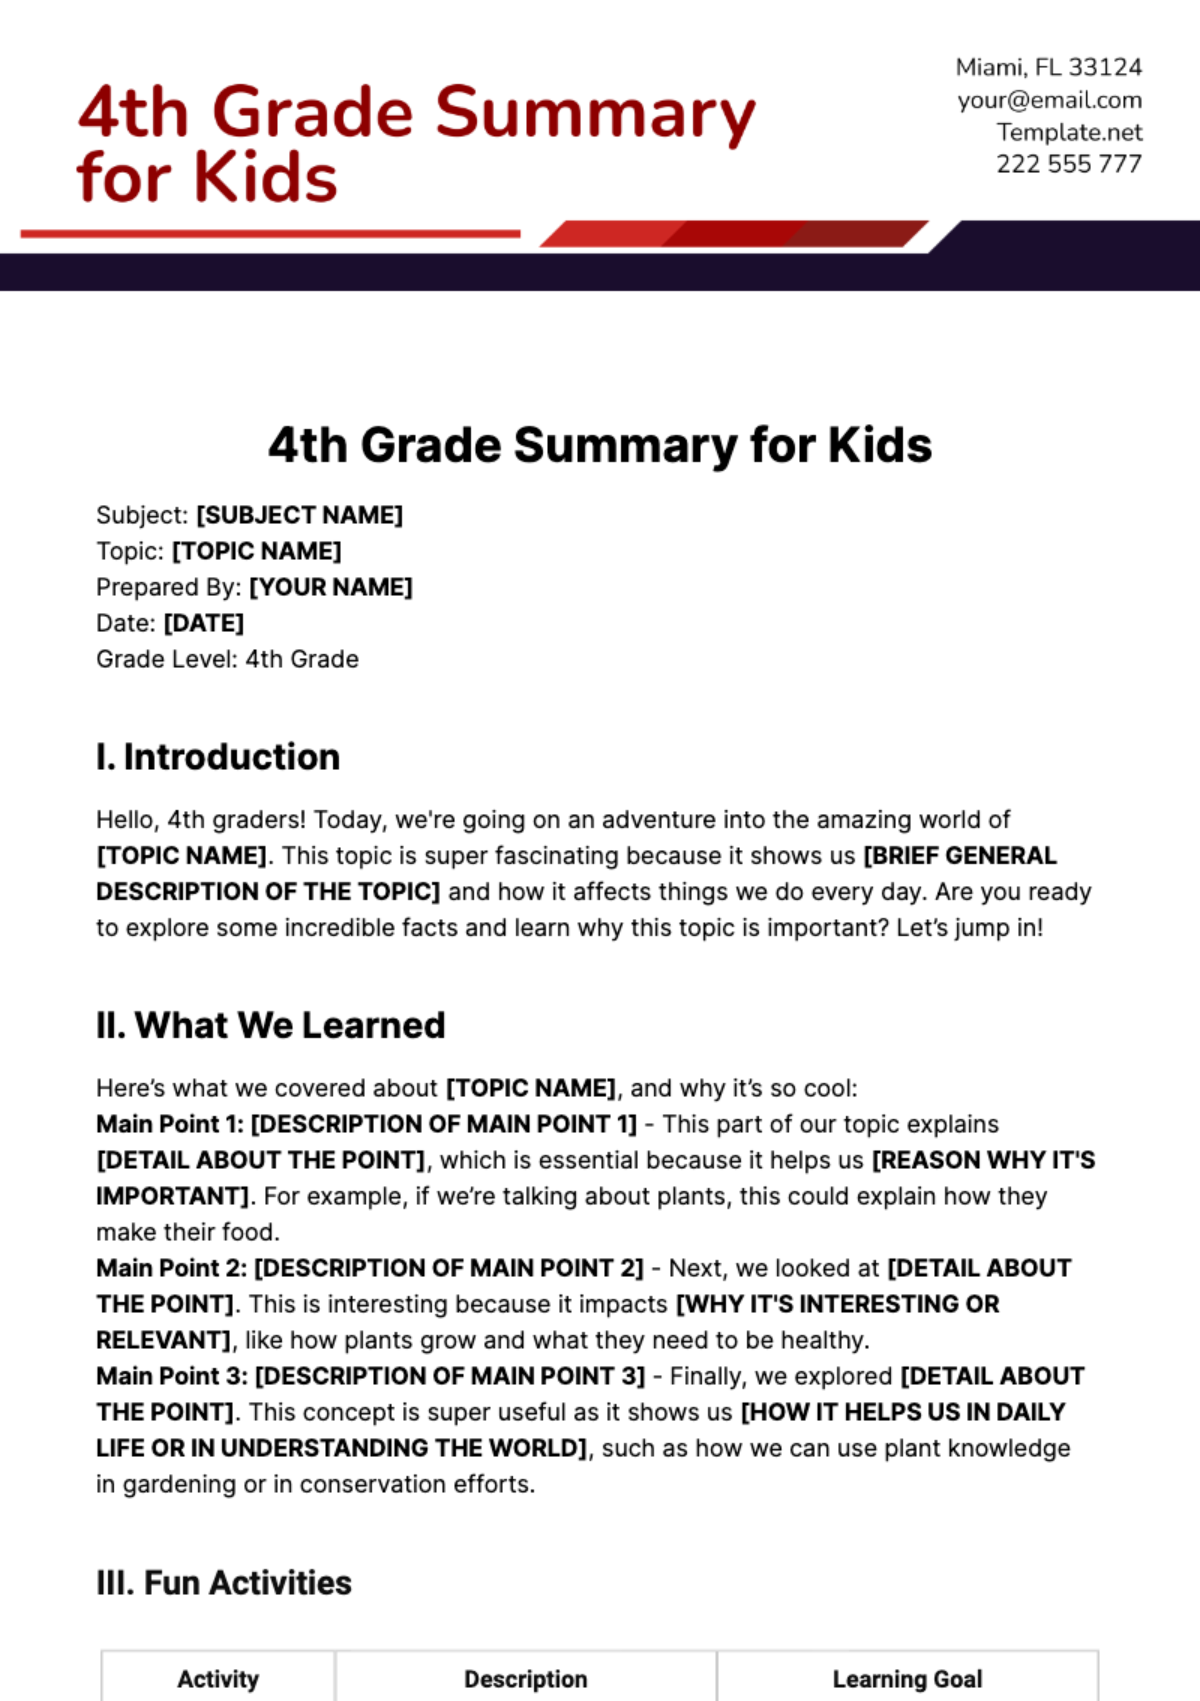 4th Grade Summary for Kids Template